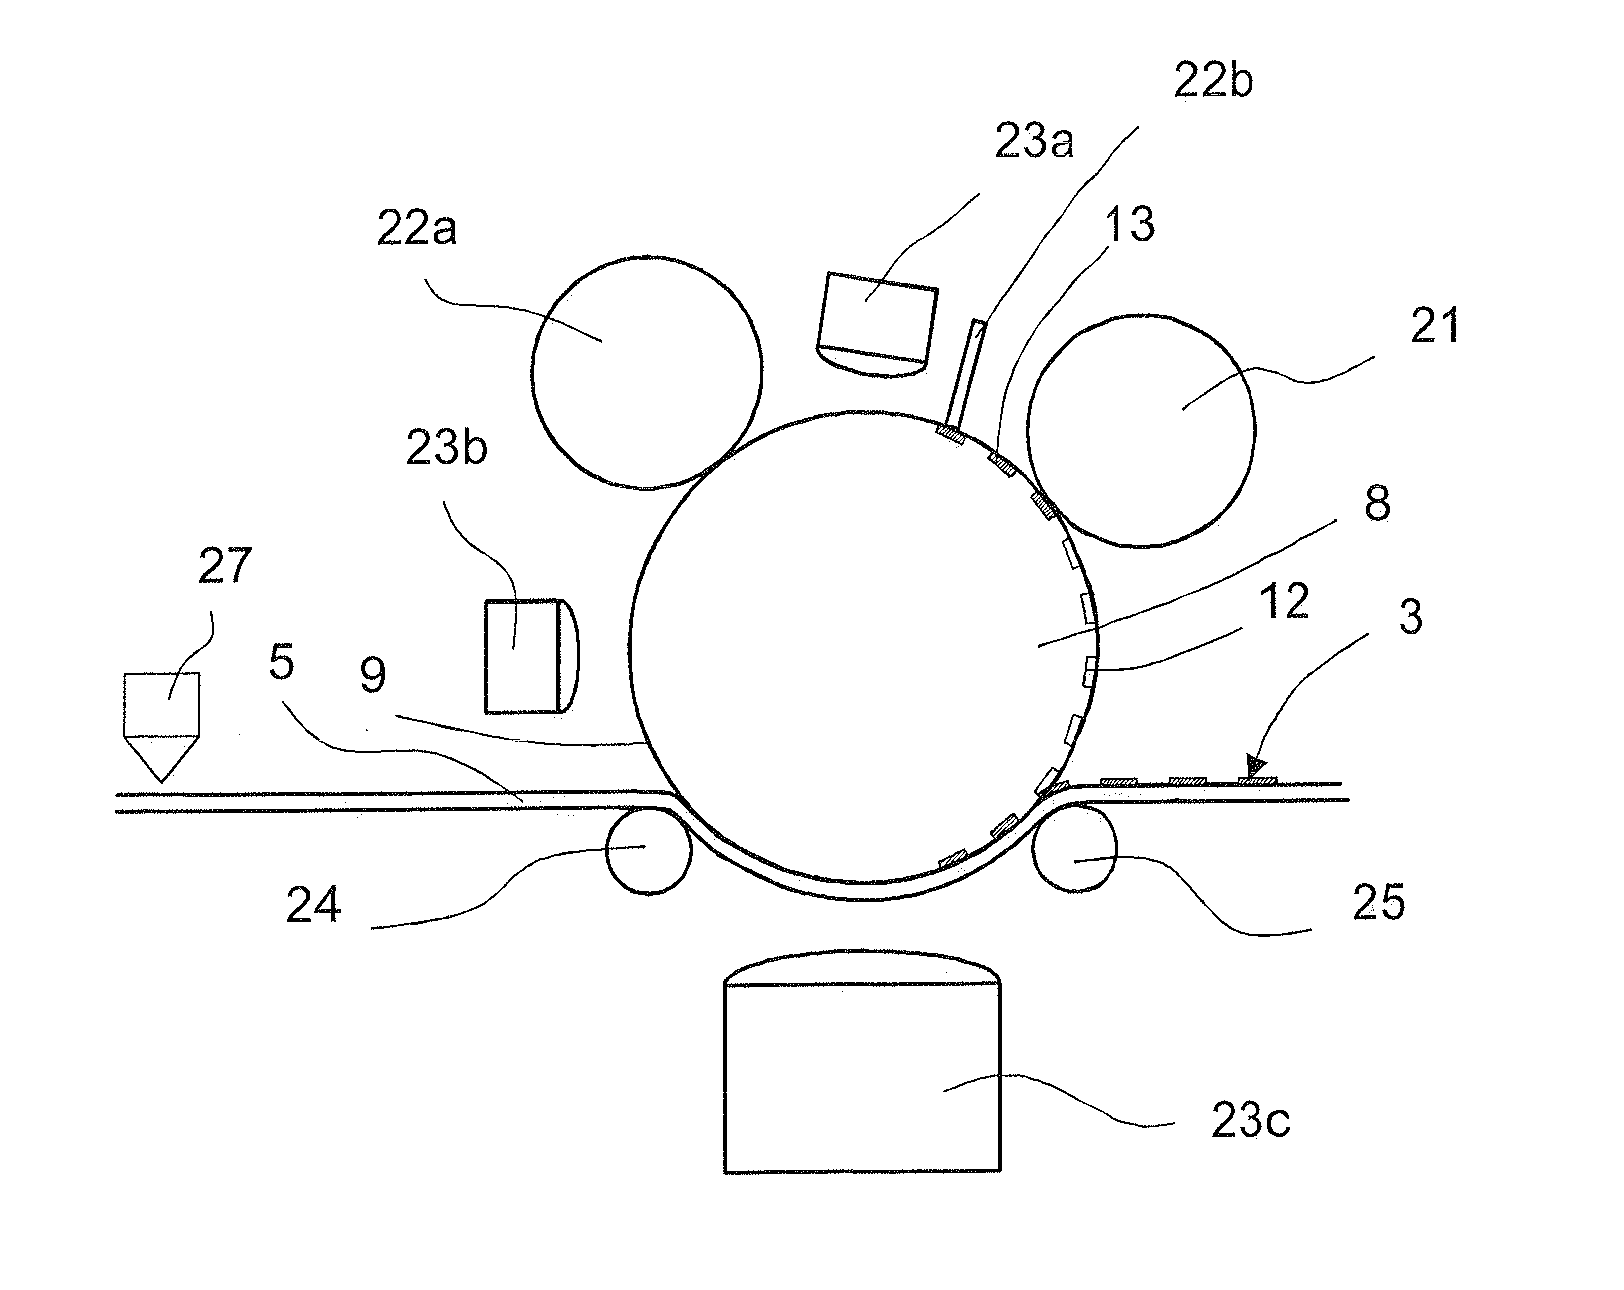 Method for printing product features on a substrate sheet